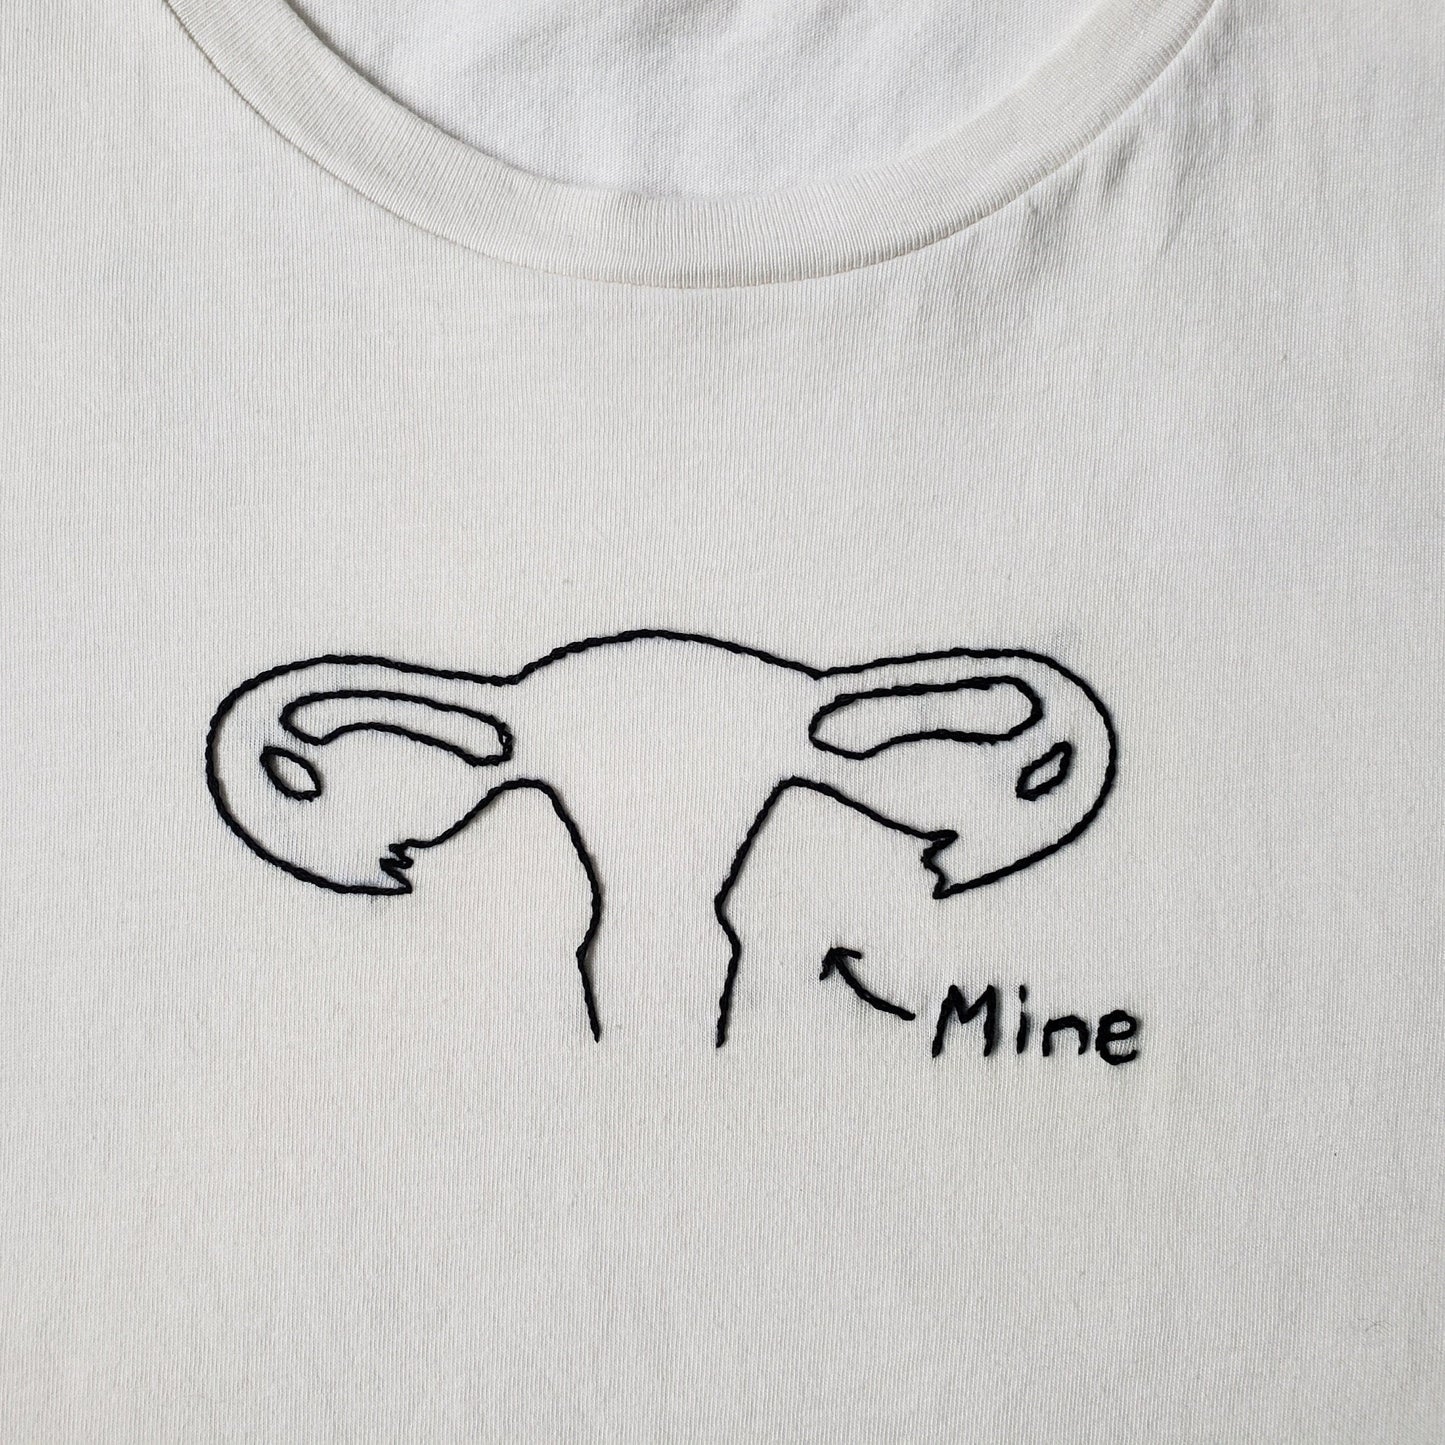 A close up of a hand embroidered uterus on a cream cotton crewneck tee. The silhouette of the organ includes the infundibulum, fimbriae and a bit of the vagina, etc. No external organs, just a fairly complete female internal anatomy in black thread, with a small "Mine" and a little arrow off to the bottom right.